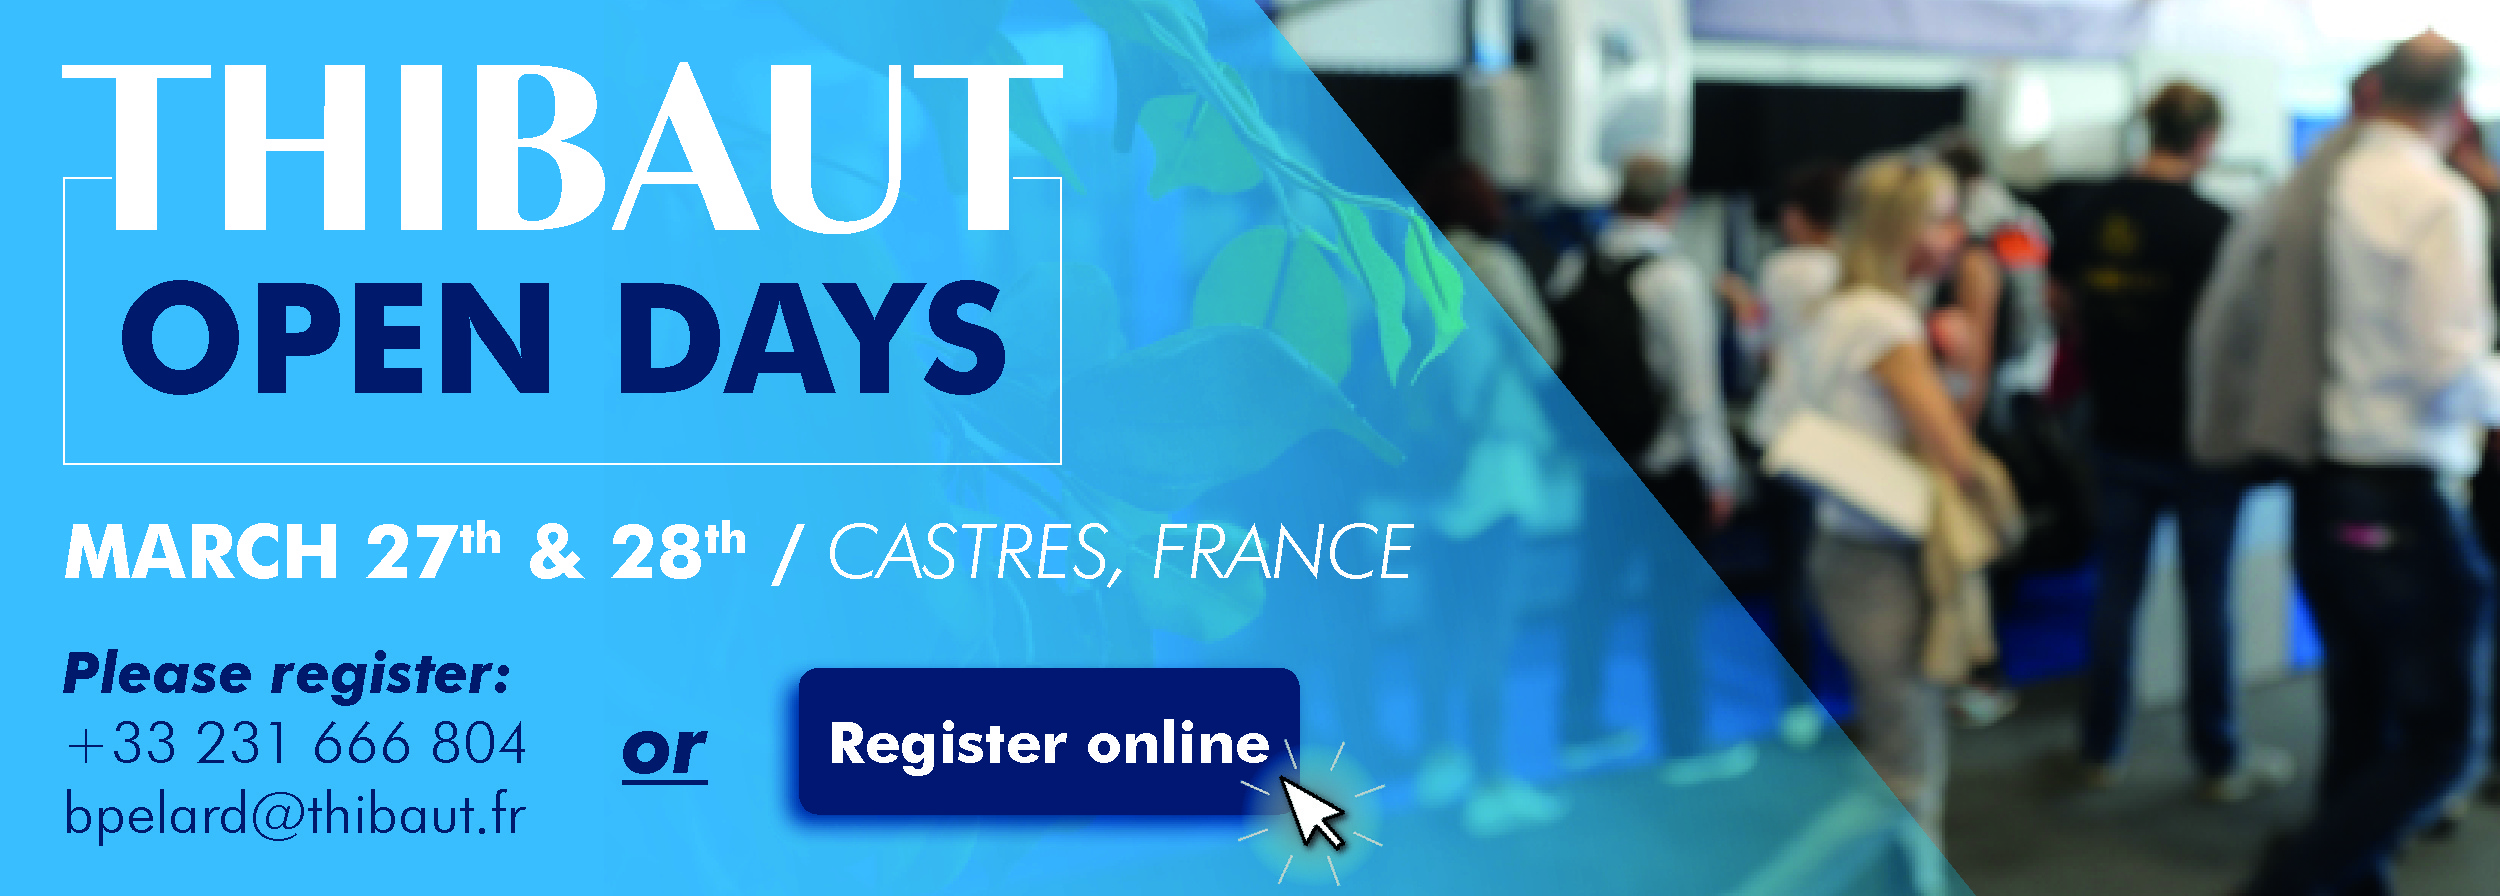 CANCELLED Thibaut Open Days 2020 in Castres